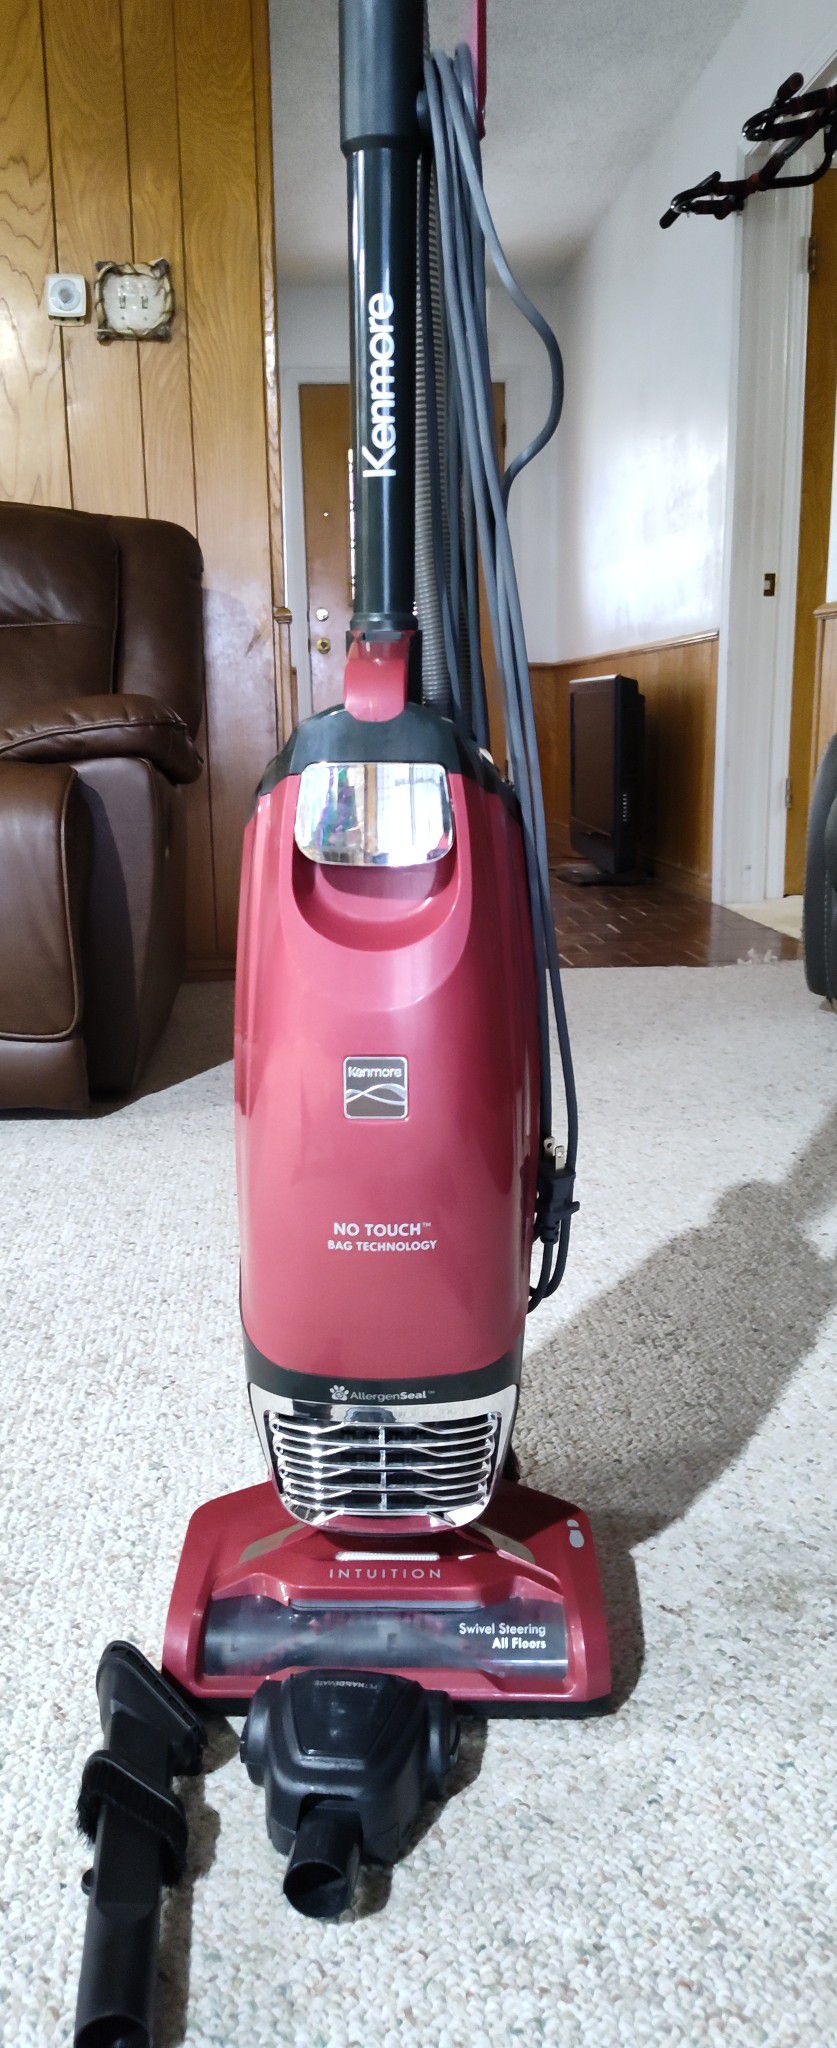 Kenmore BU3040 Intuition Lite Bagged Upright Vacuum Lightweight Cleaner 2-Motor Power Suction with HEPA Filter, 3-in-1 Combination Tool, Handi-Mate fo